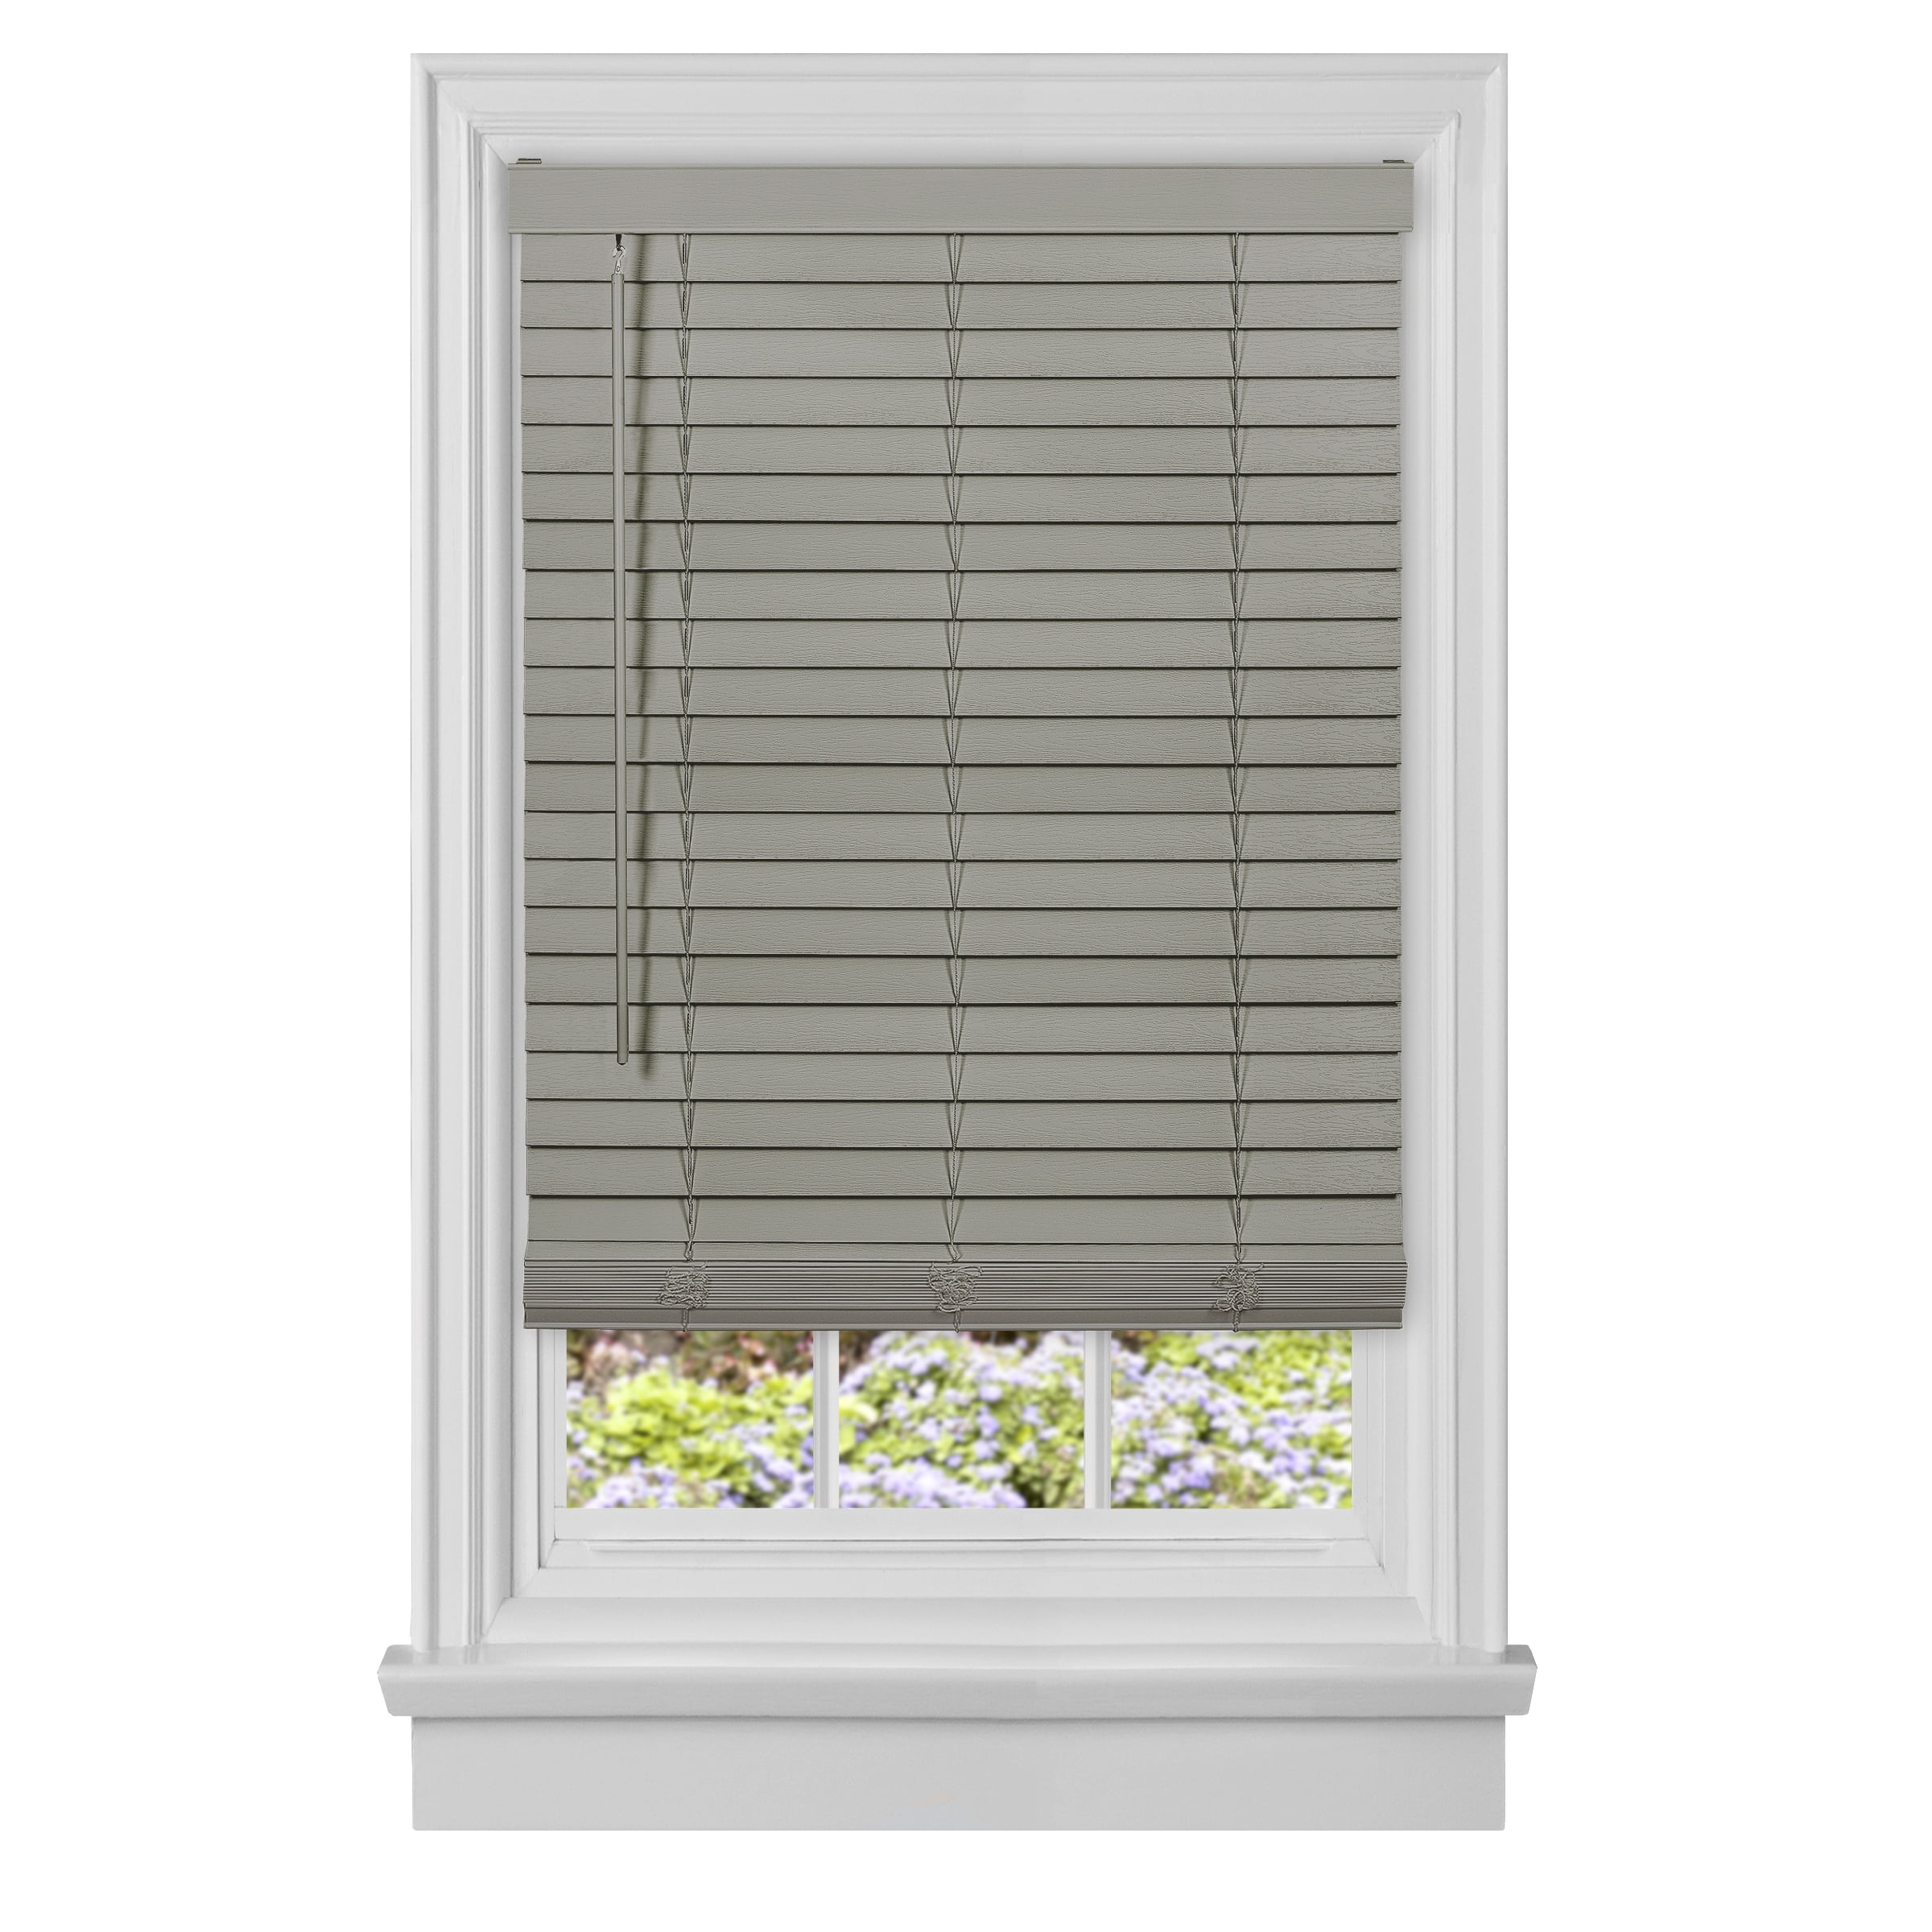 Picture of Achim MFG245GY02 45 x 64 in. Cordless GII Madera Falsa 2 in. Faux Wood Plantation Blind - Grey